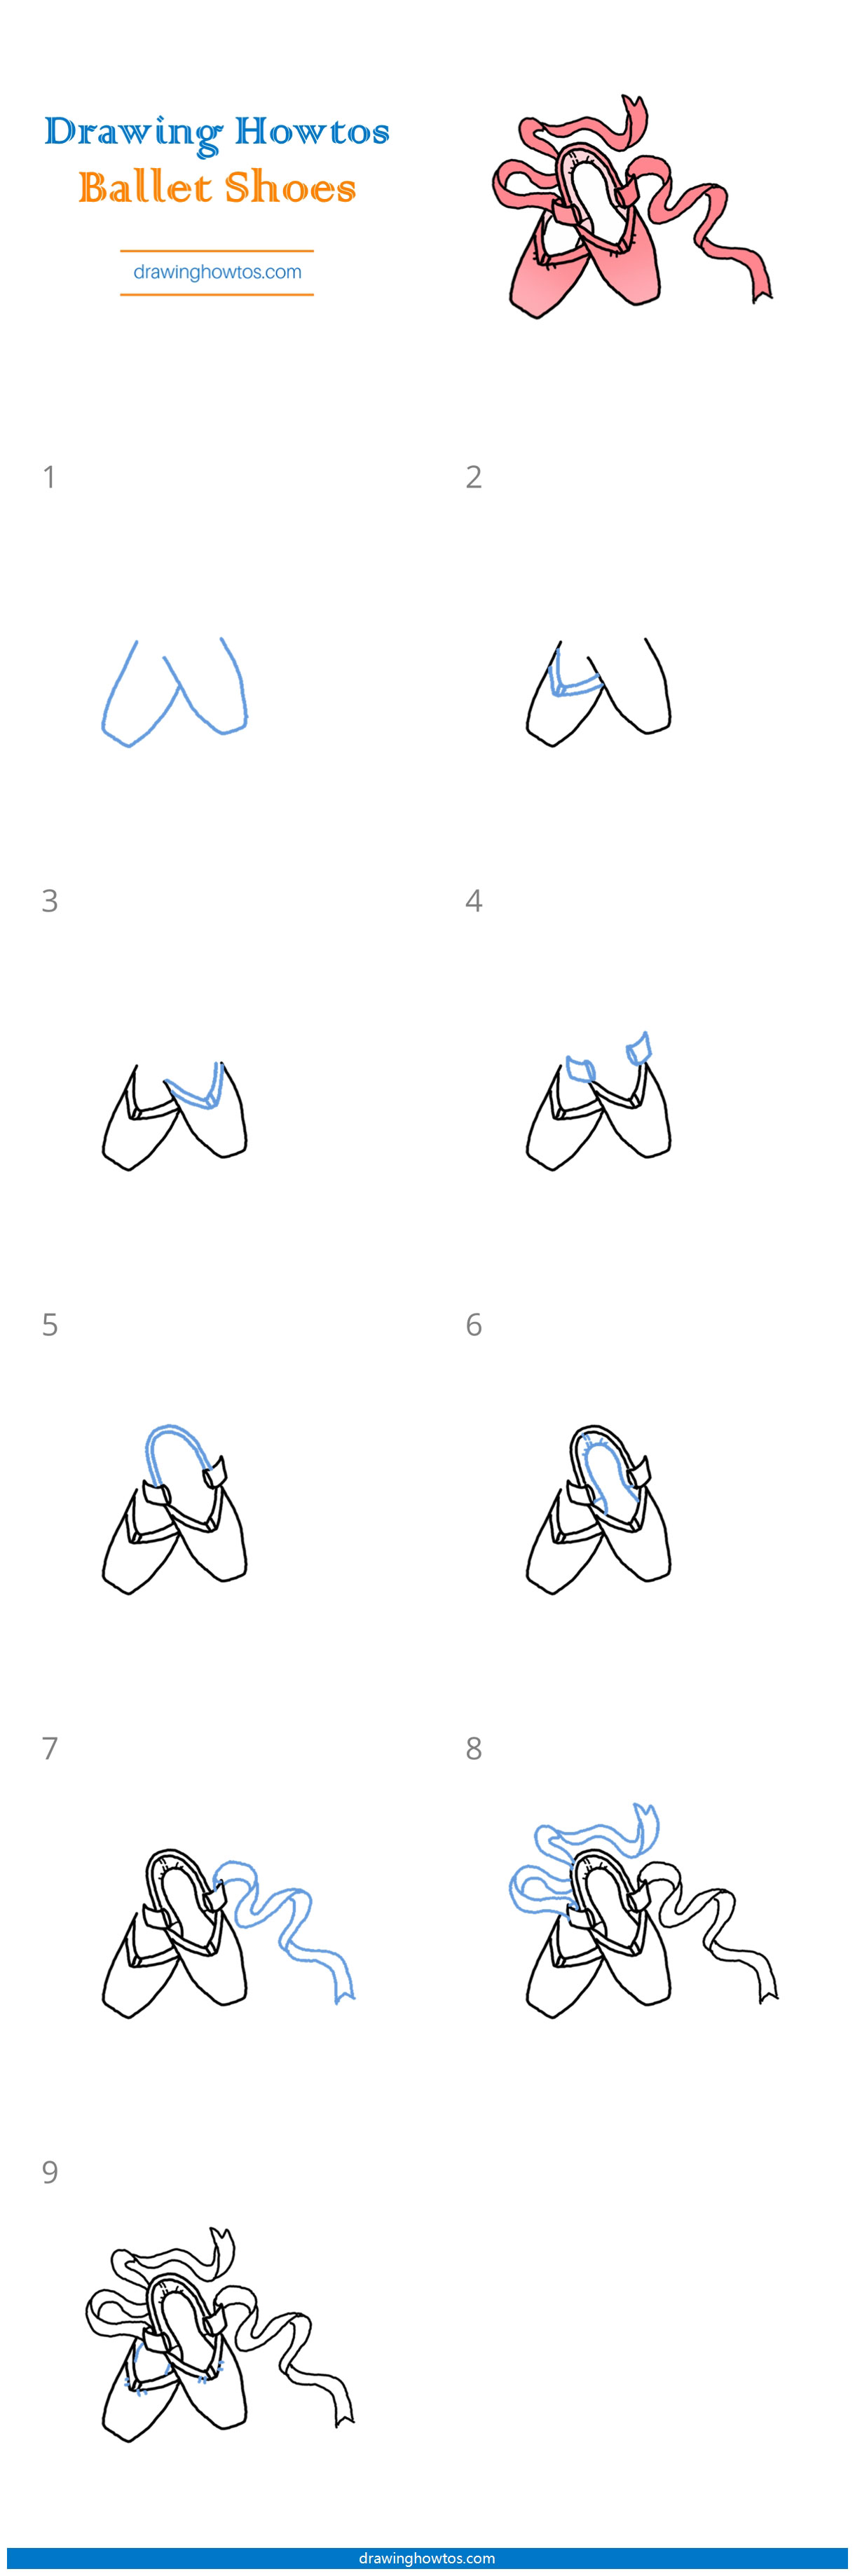 How to Draw Ballet Shoes Step by Step Easy Drawing